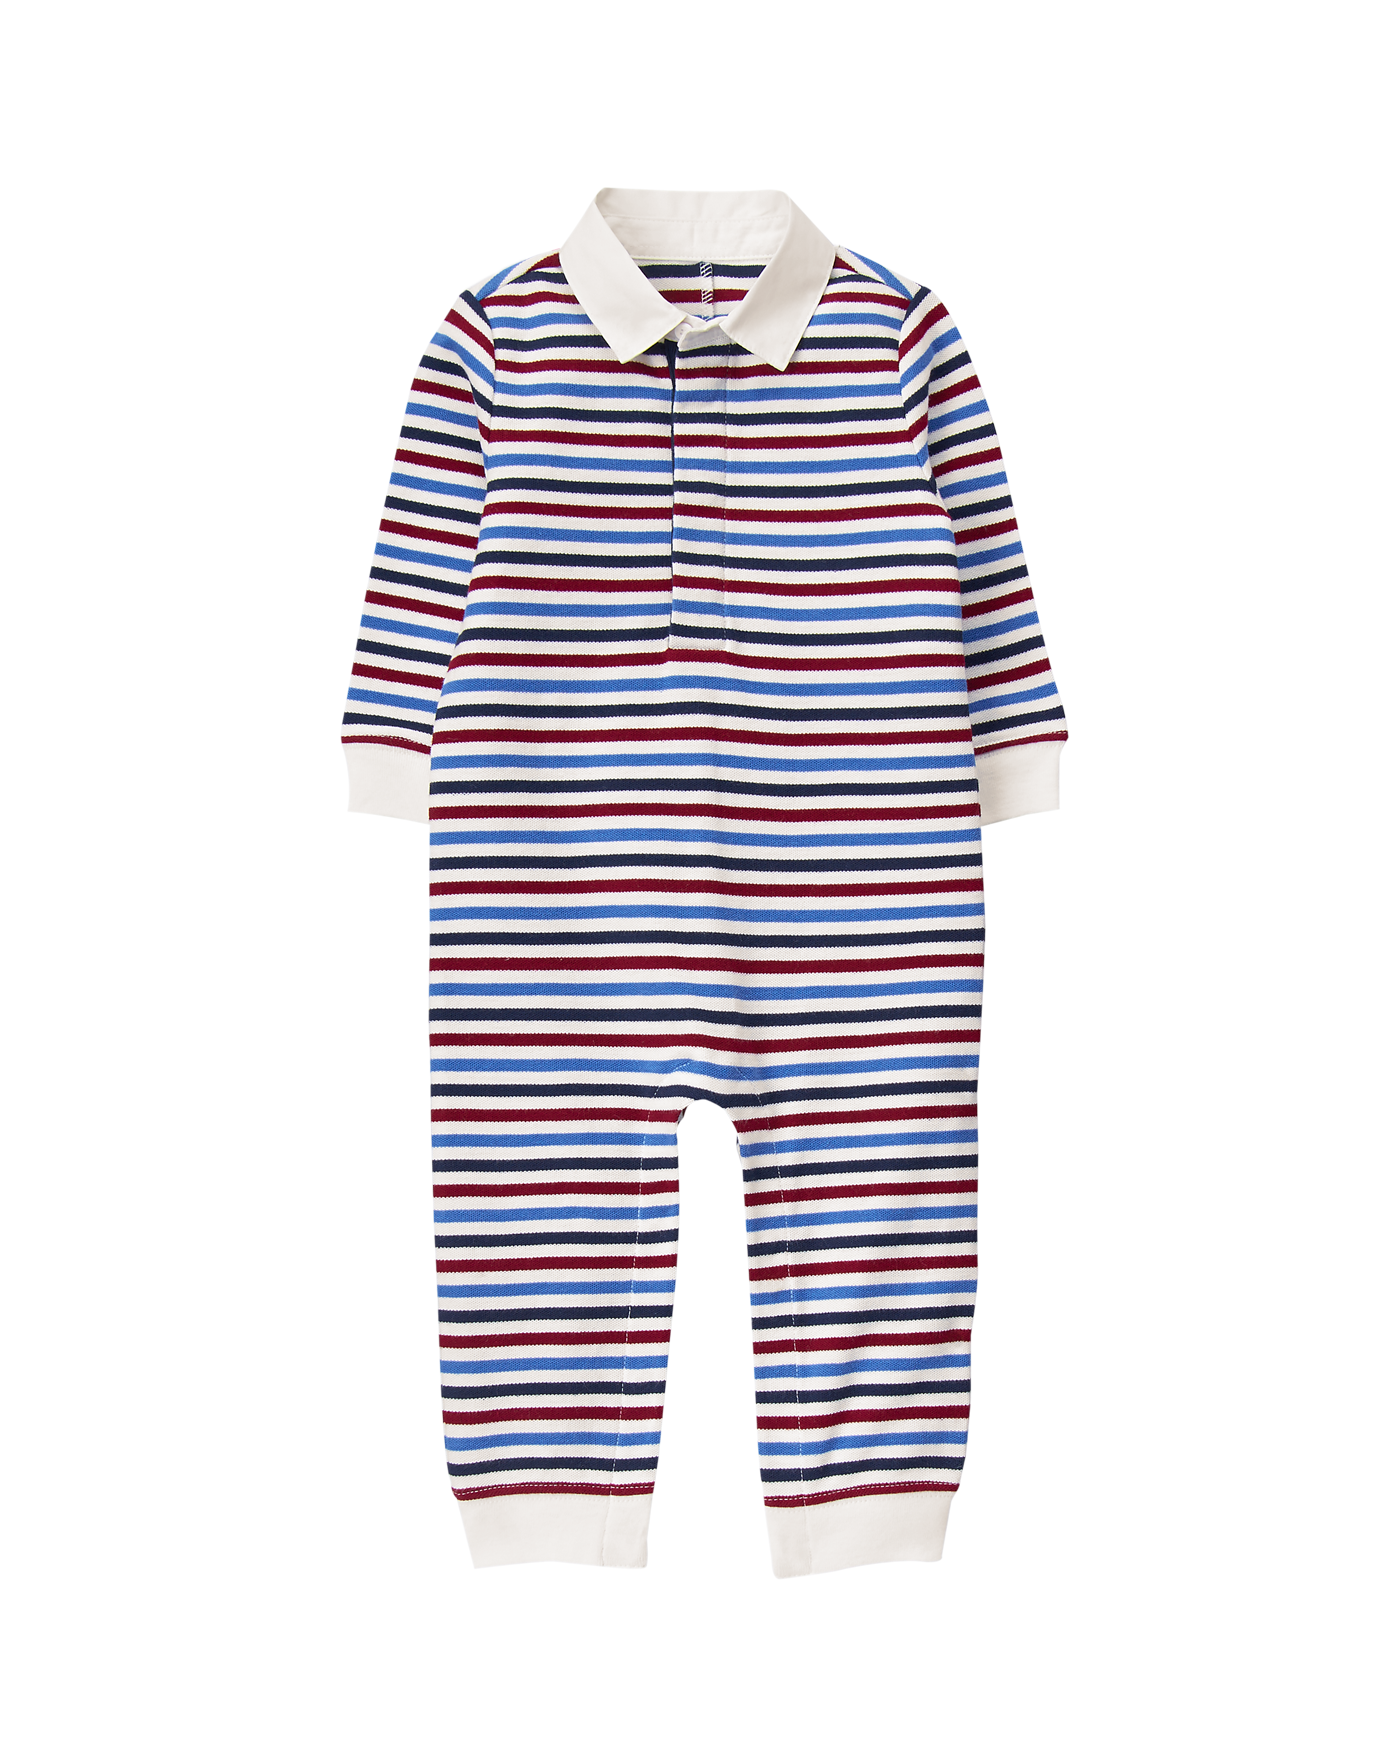 Striped Polo 1-Piece image number 0